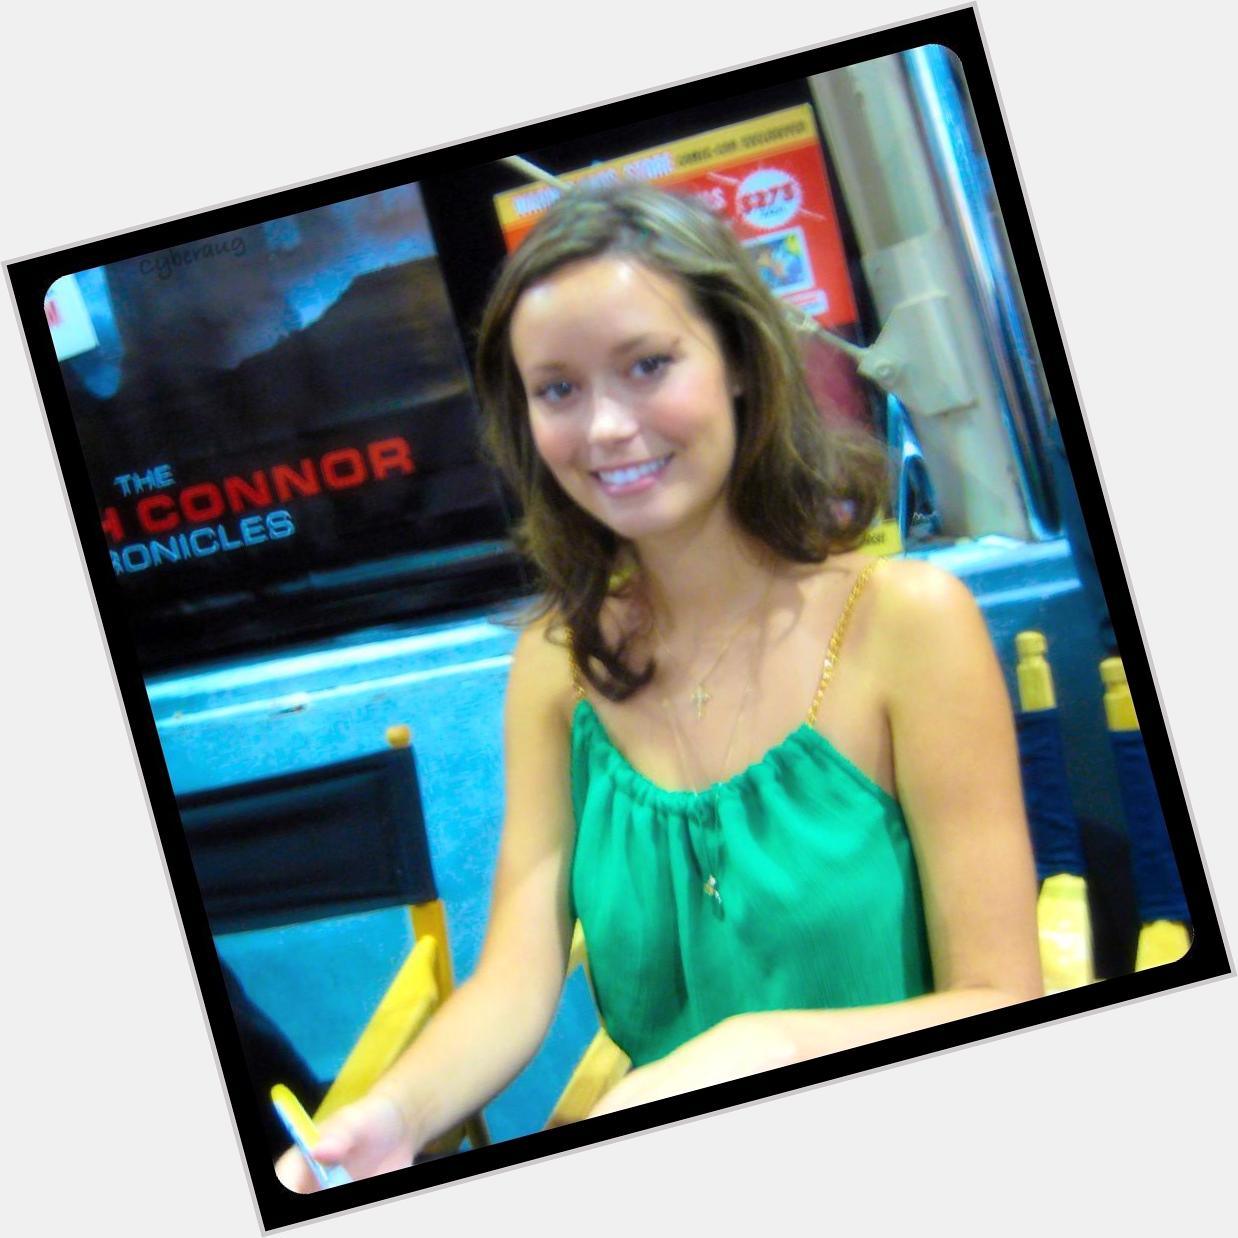 Happy Birthday to a great actress & amazing person Summer Glau! 